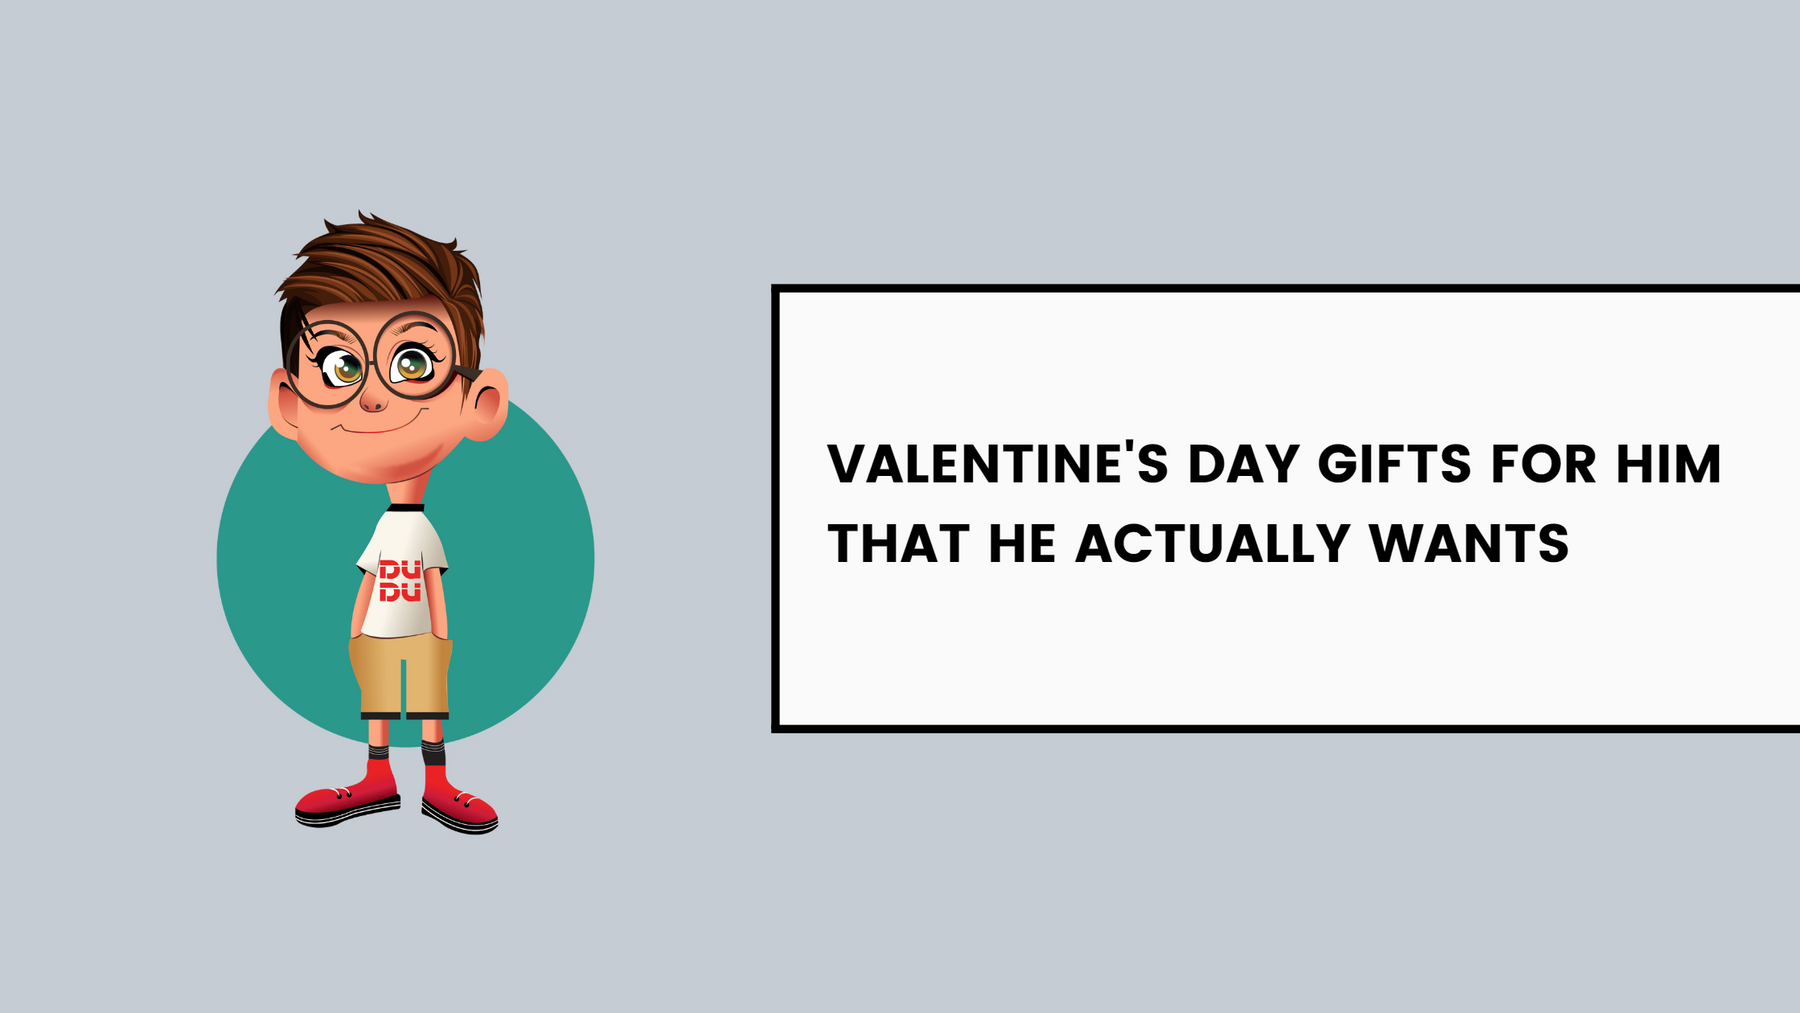 Valentine's Day Gifts for Him That He Actually Wants